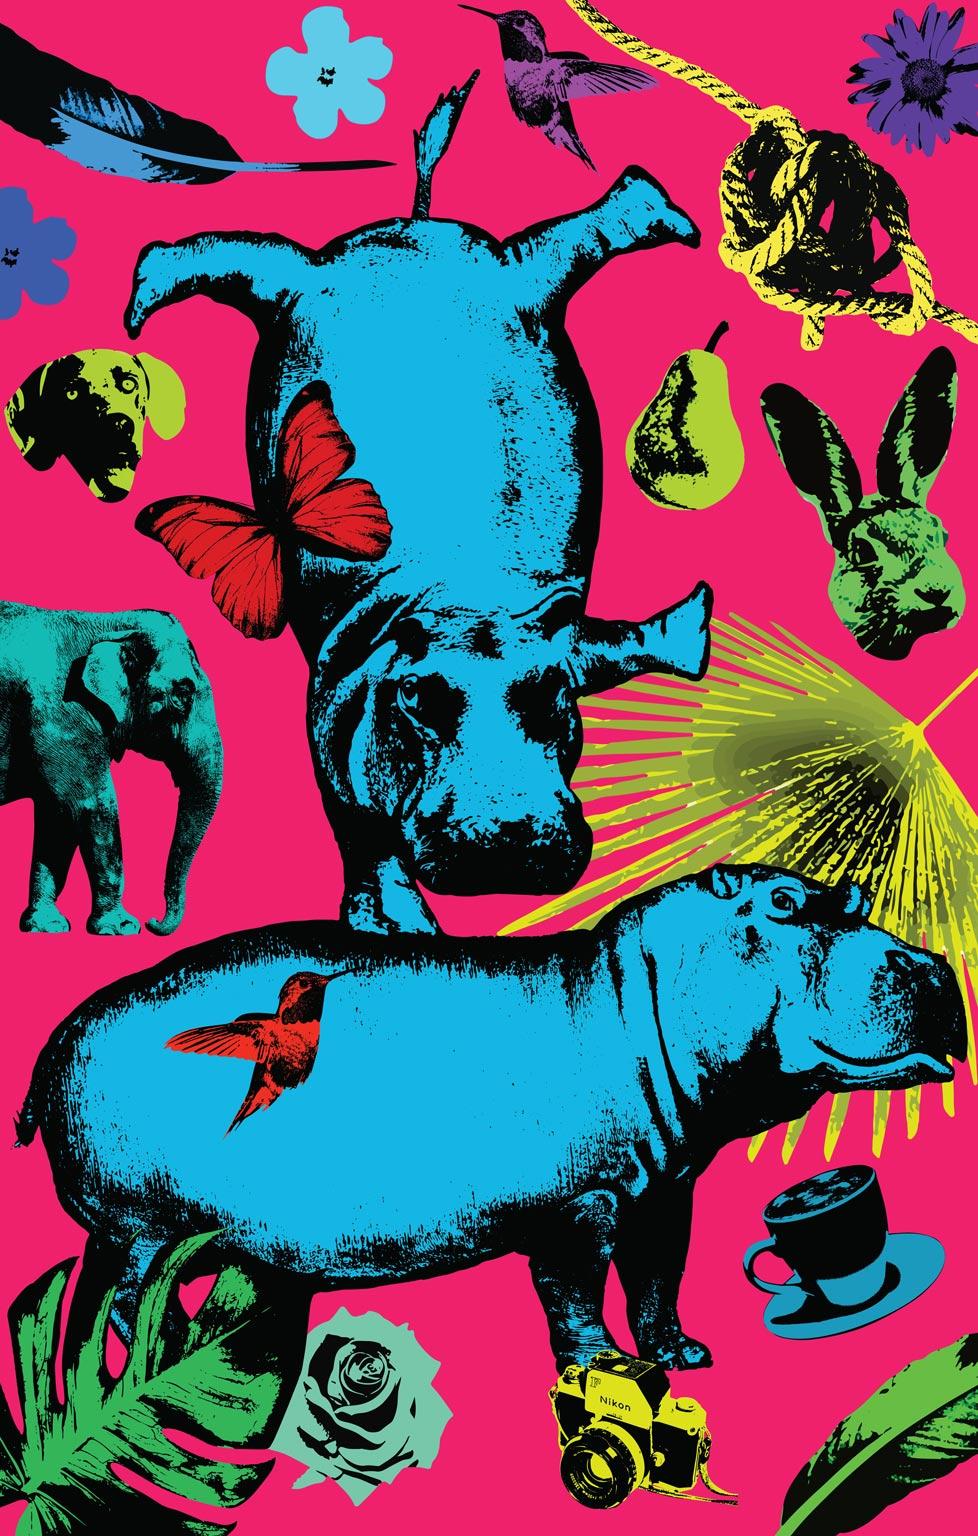 Pop Art - Painting Print - Gillie and Marc - Limited Edition - Hippos and fun